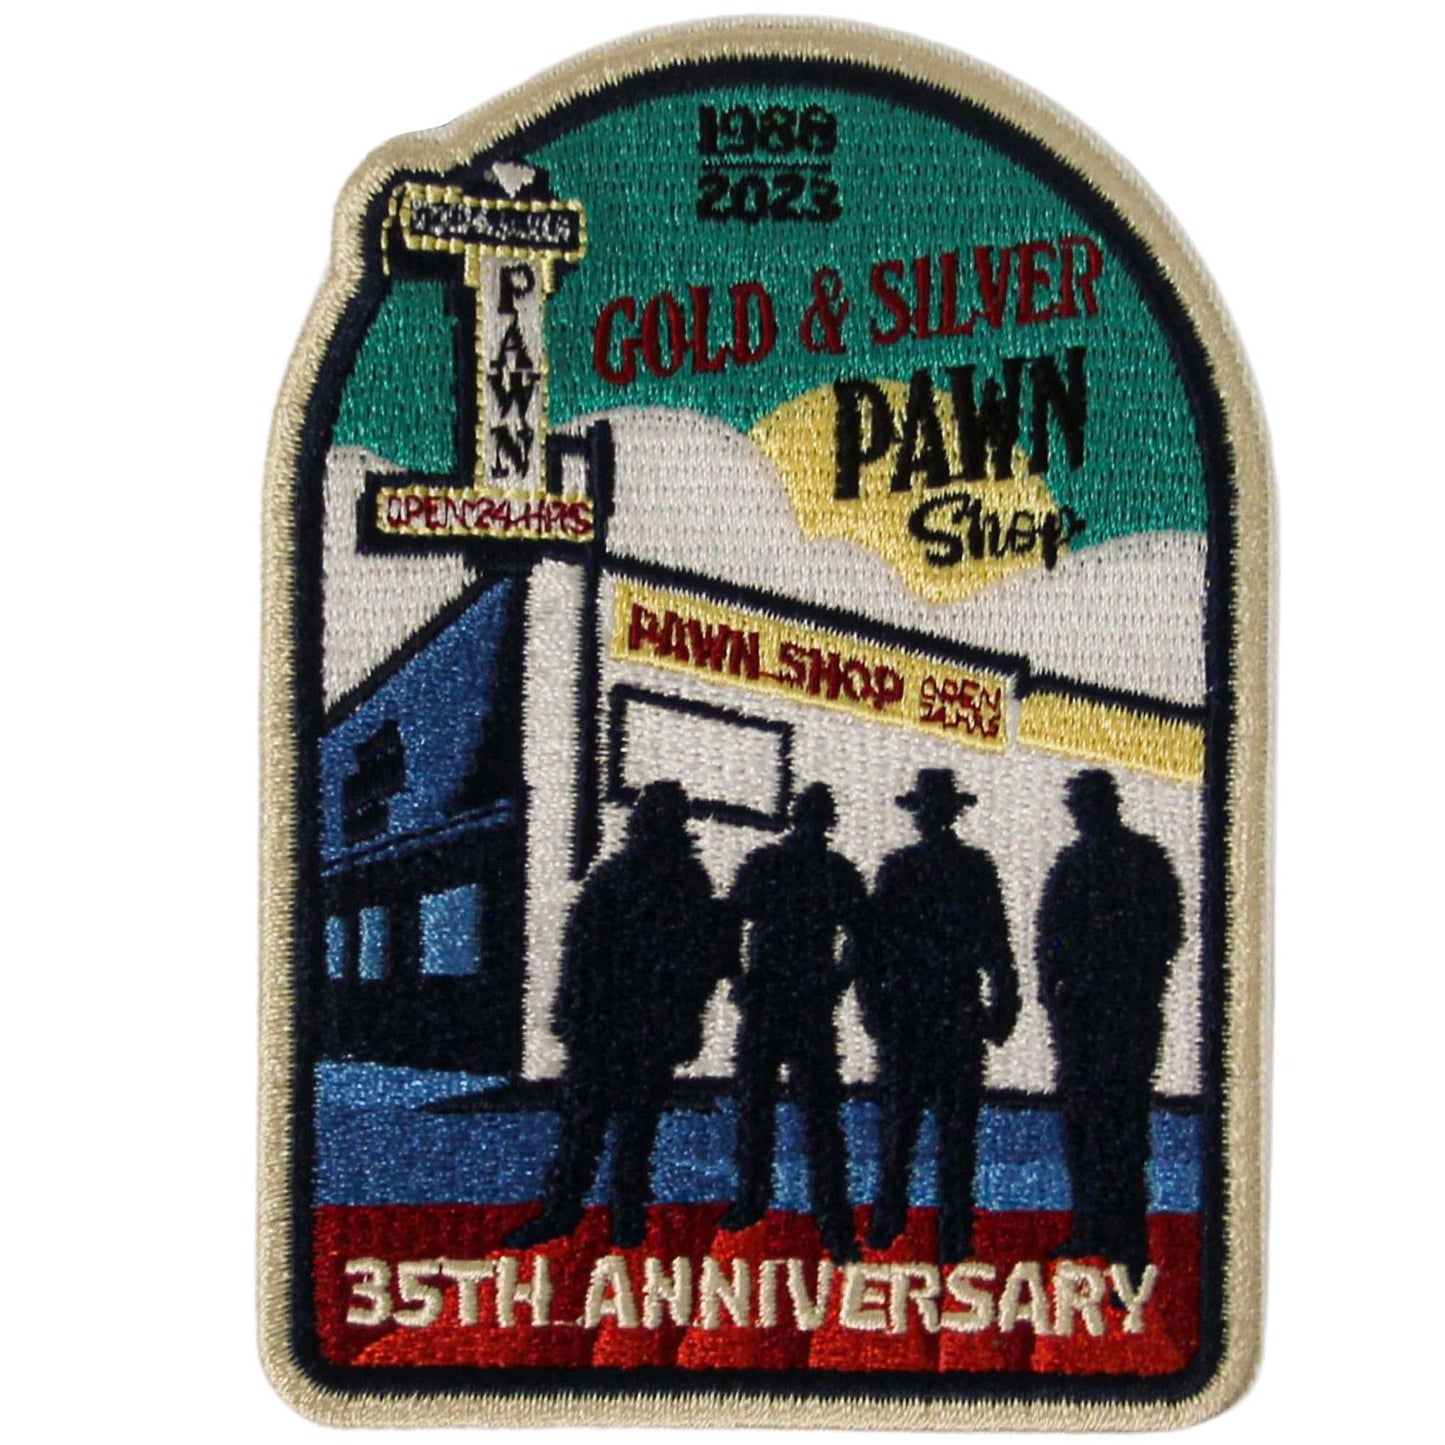 The World Famous Gold & Silver Pawn Shop Patches Blue Sky